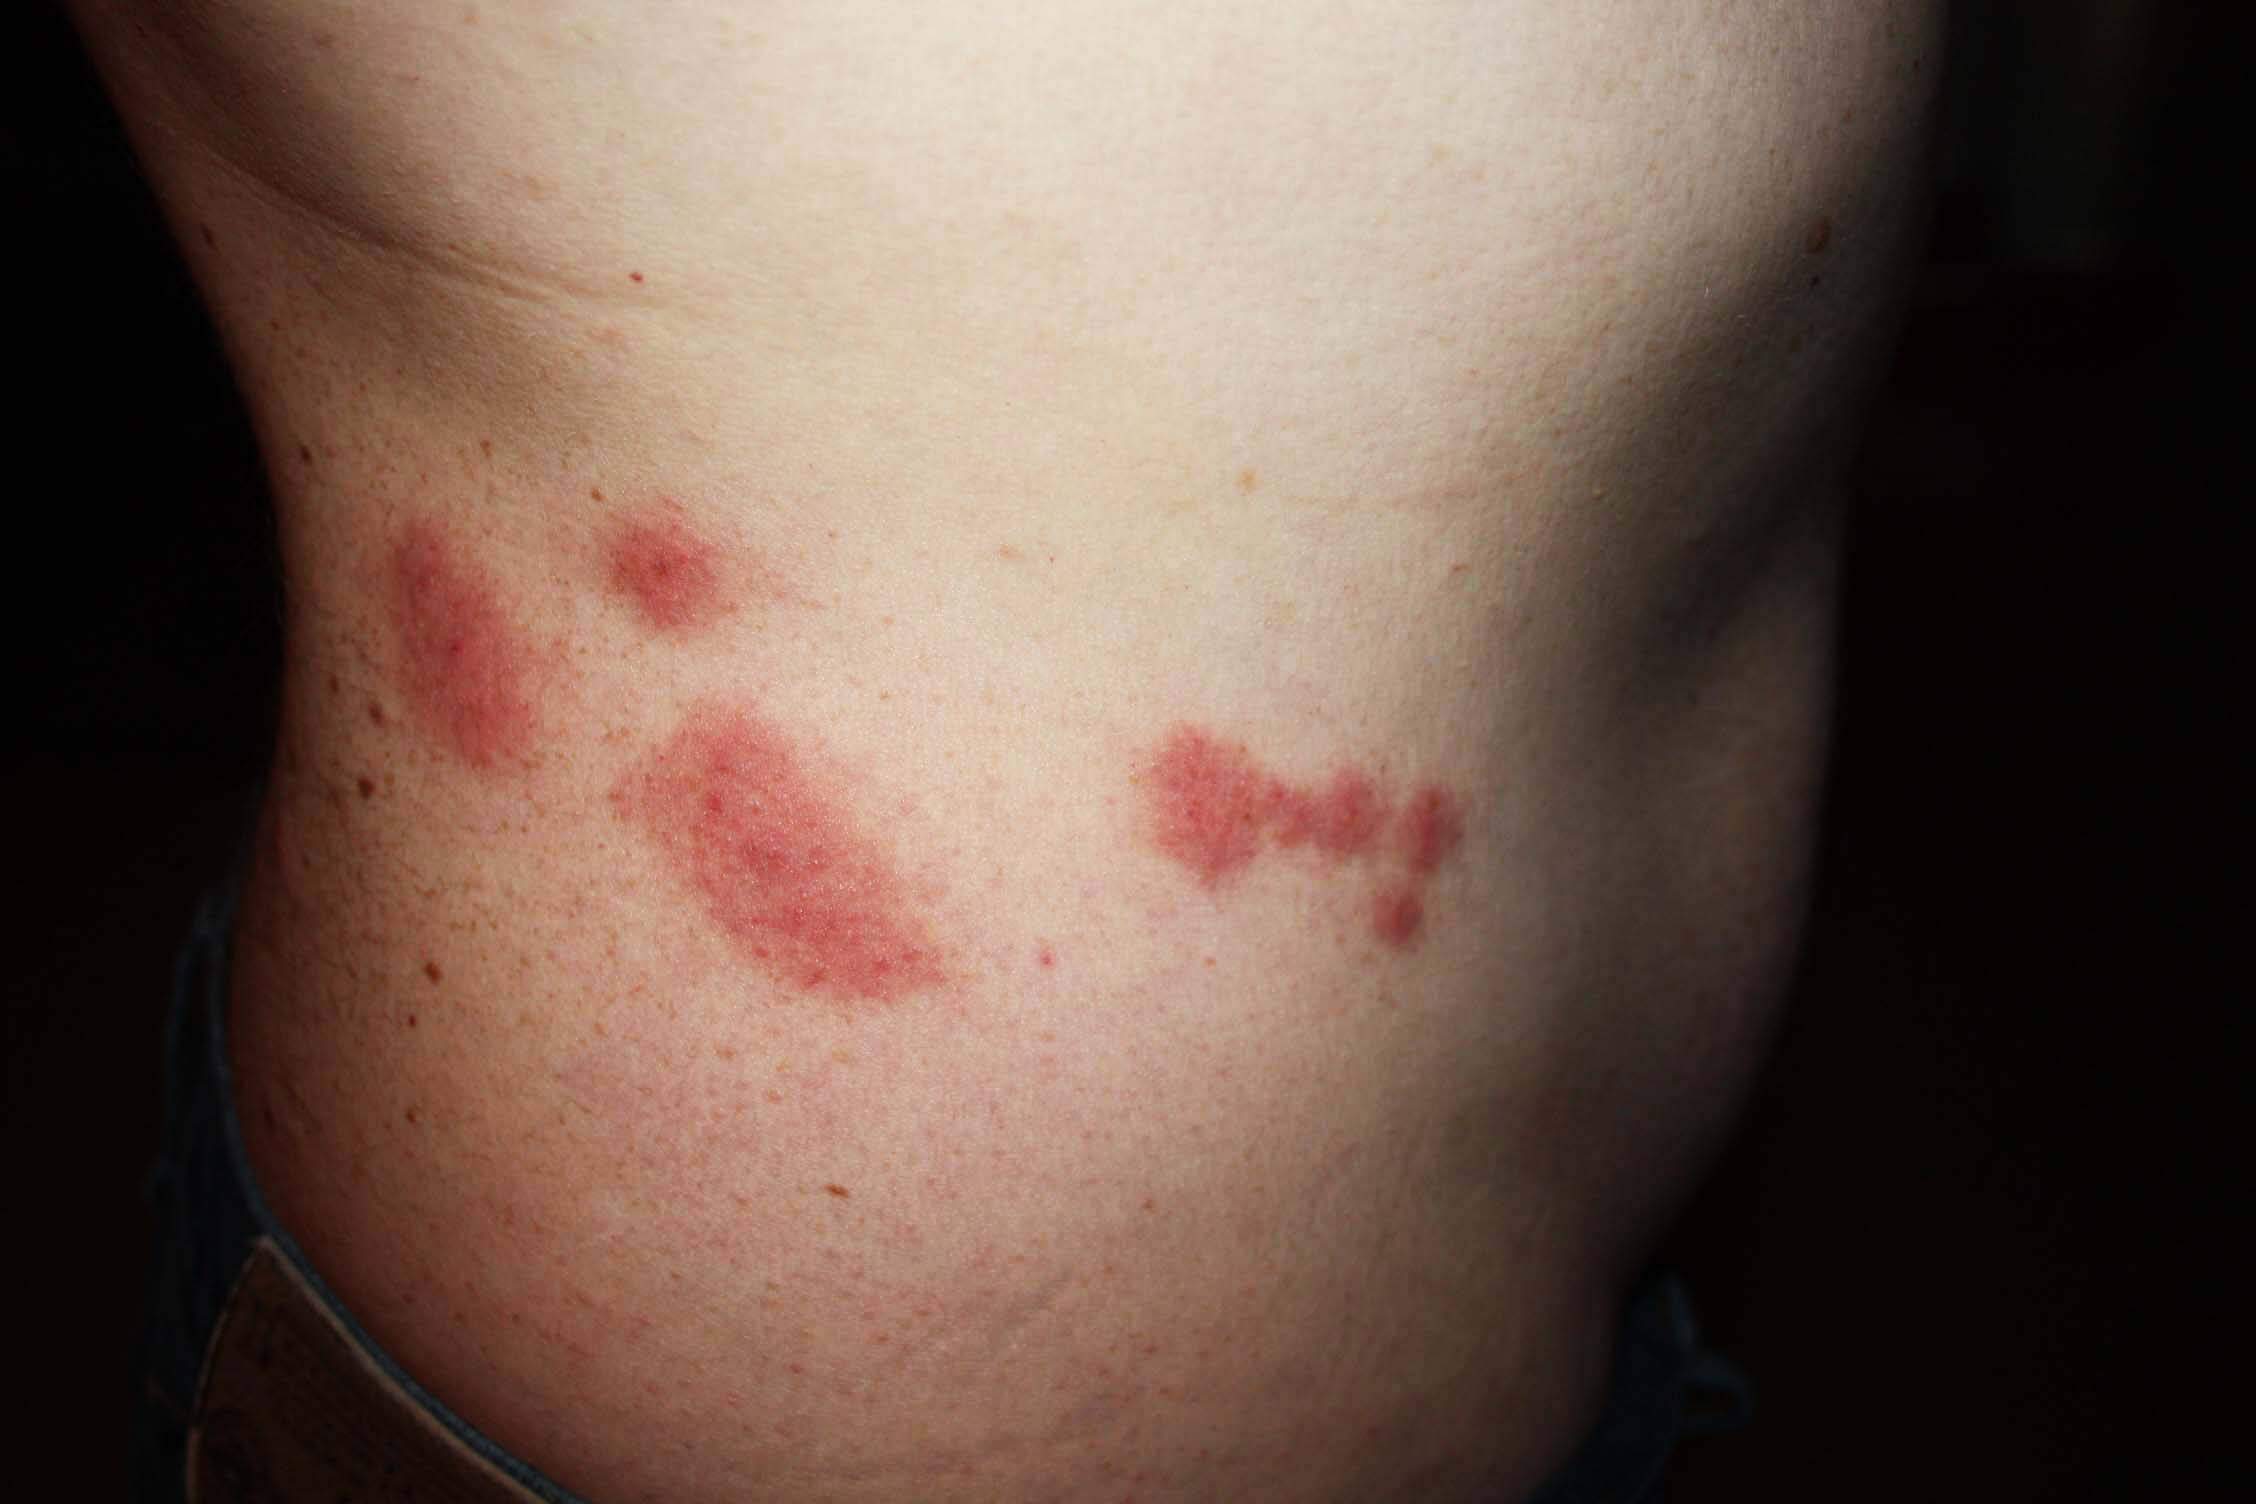 bug bites that itch and welt